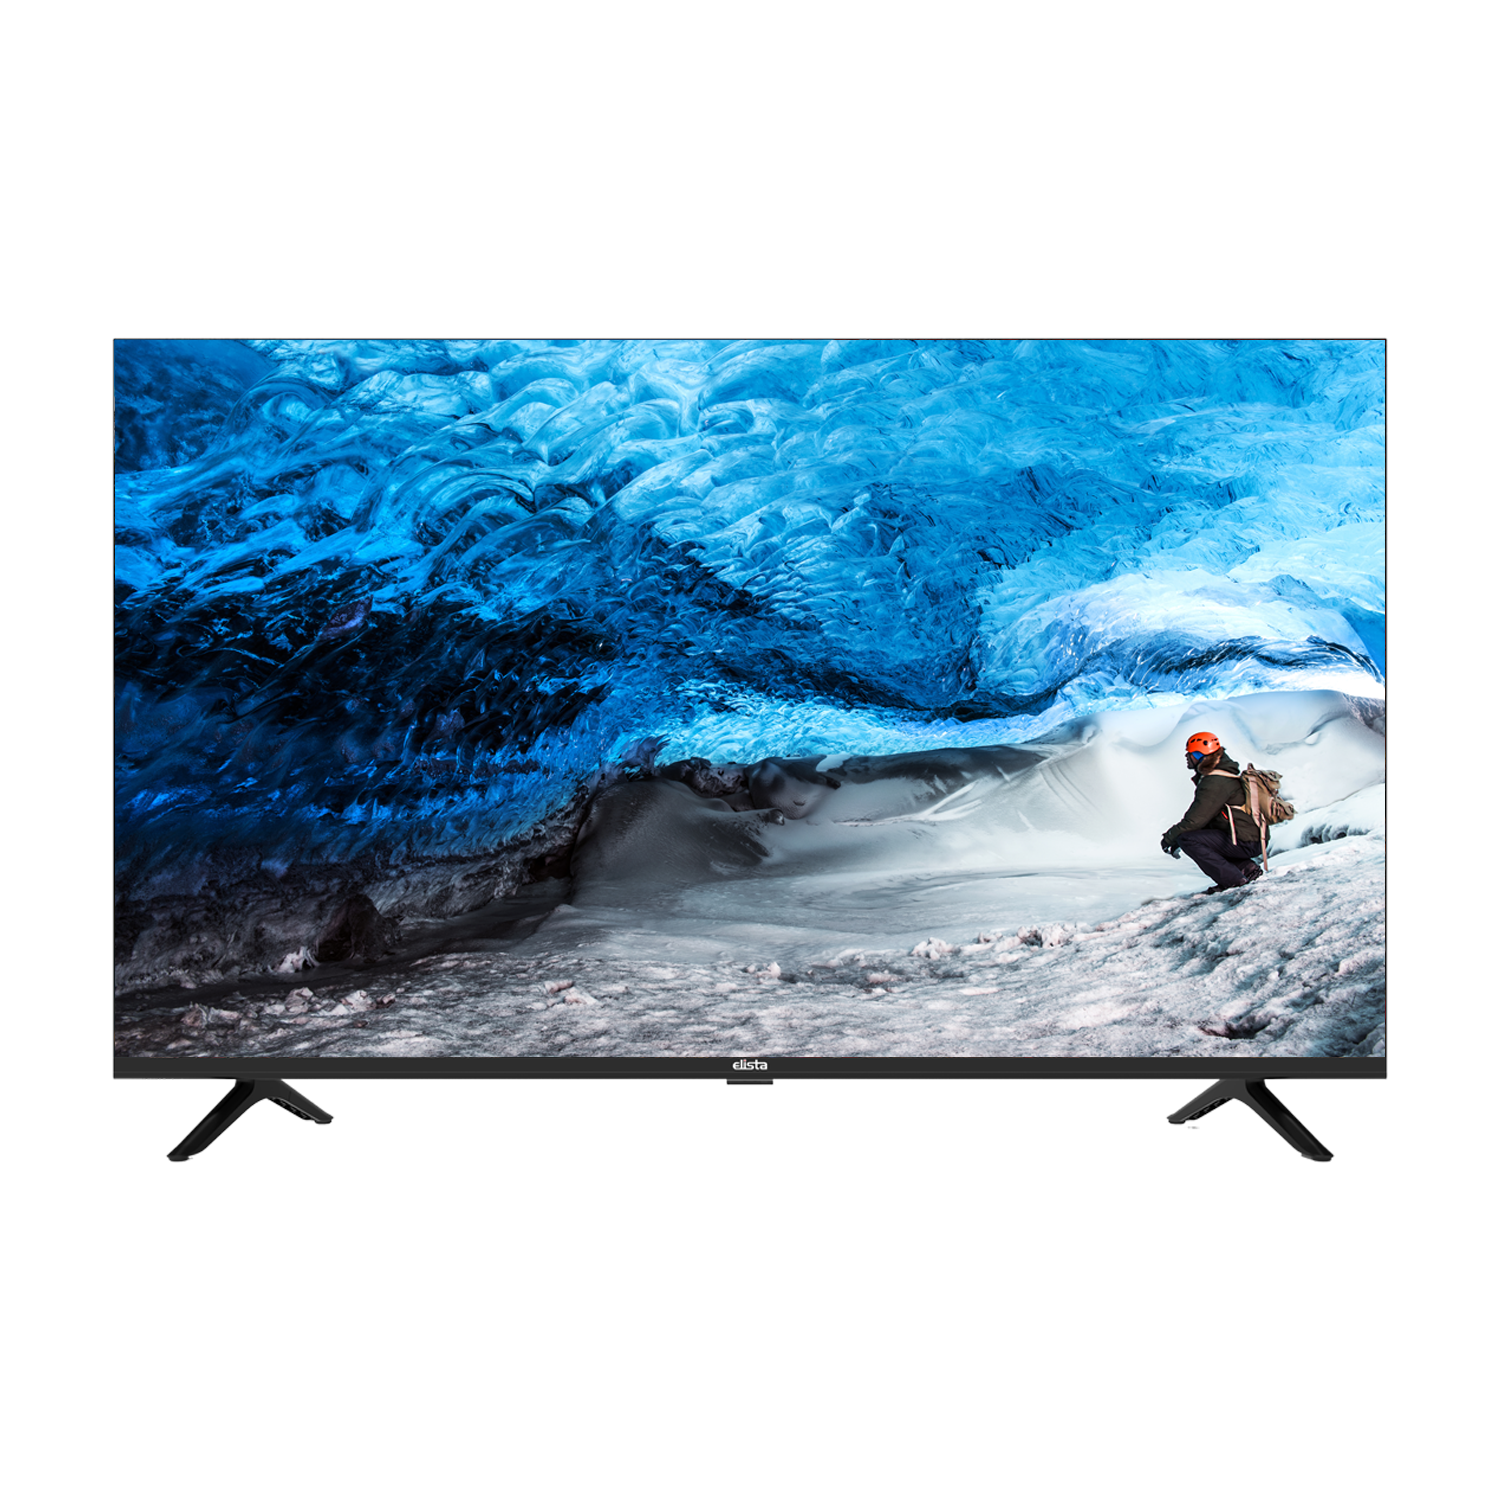 Google LED TV 32 Inches at Best Price - Elista